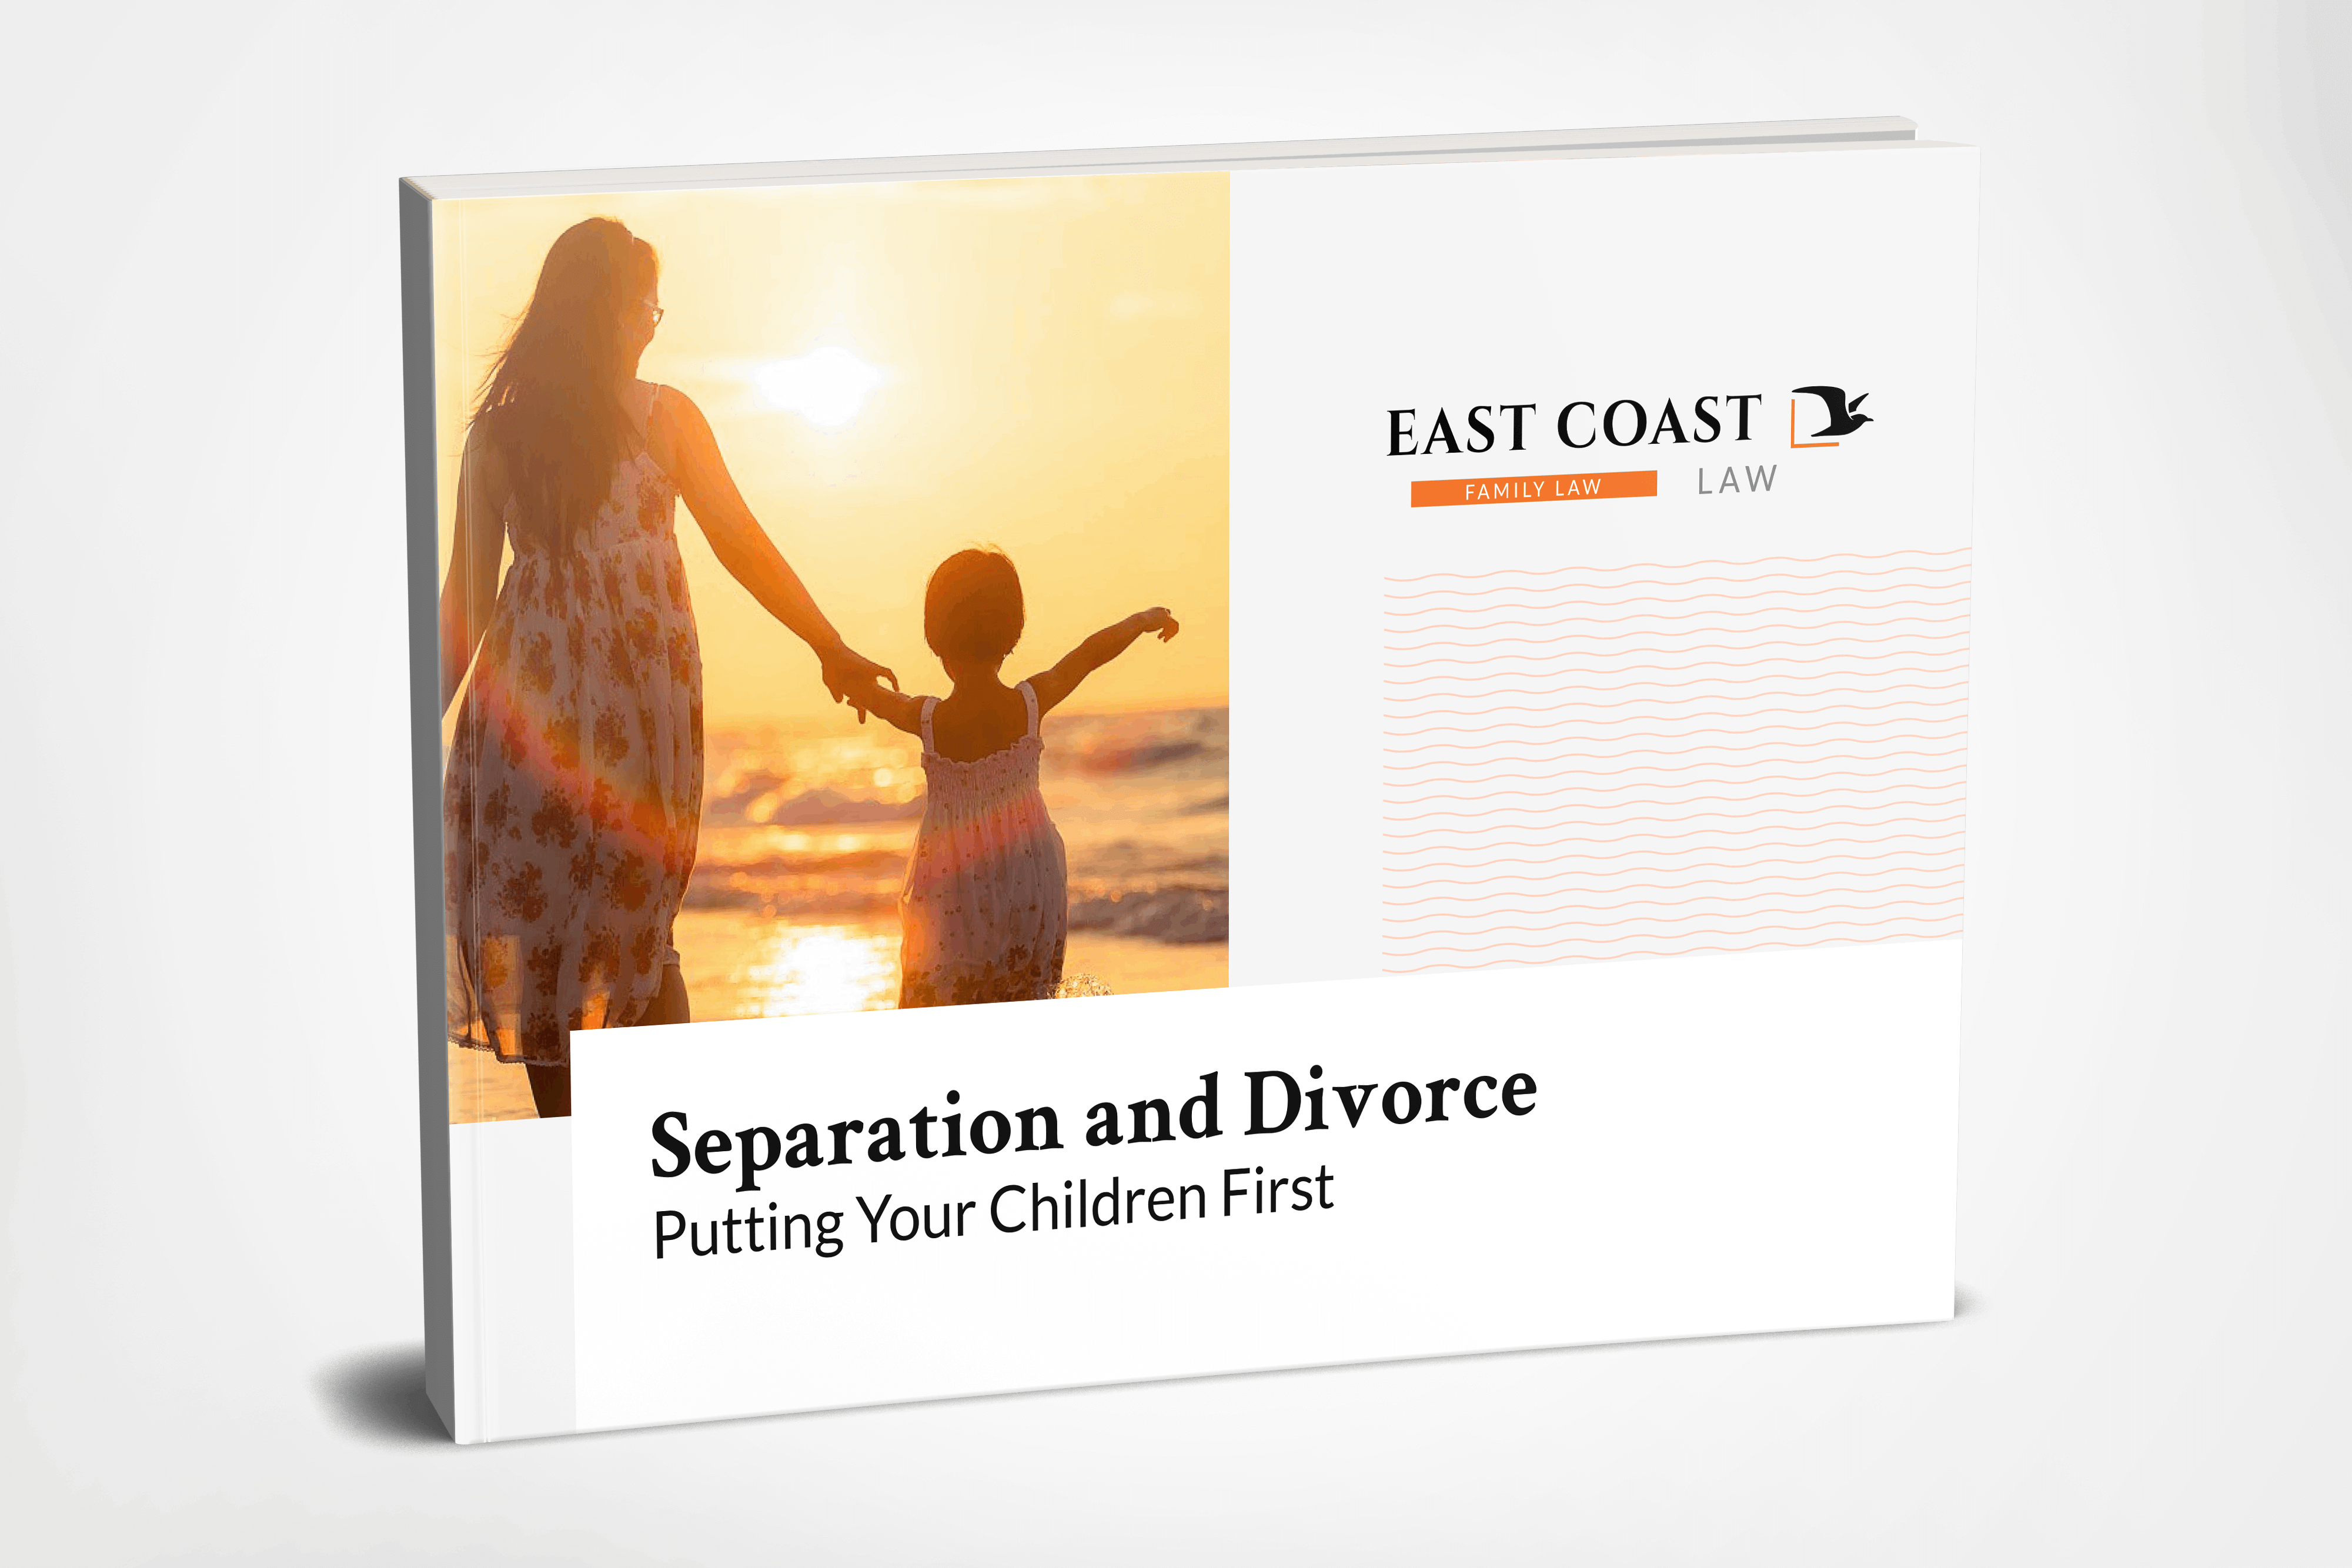 Separation and Divorce: Putting your Children First